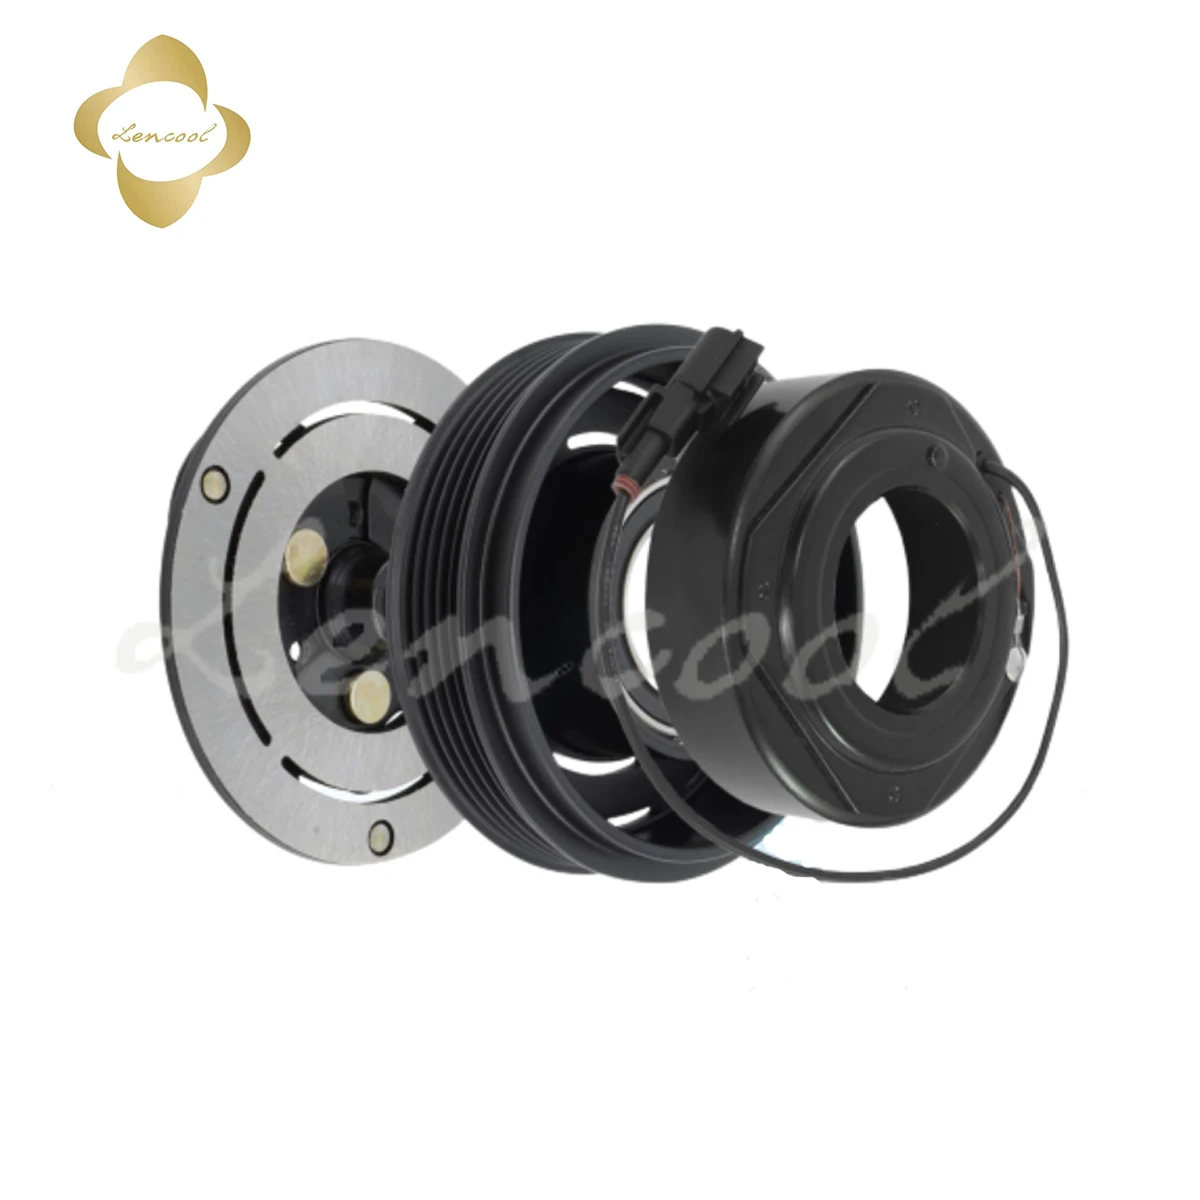 

AC A/C Air Conditioning Compressor Clutch Pulley For VOLVO XC60 V70 XC70 2.4D 2.5T FORD MONDEO 4 2.5 ST 31250664 1377827 1453378